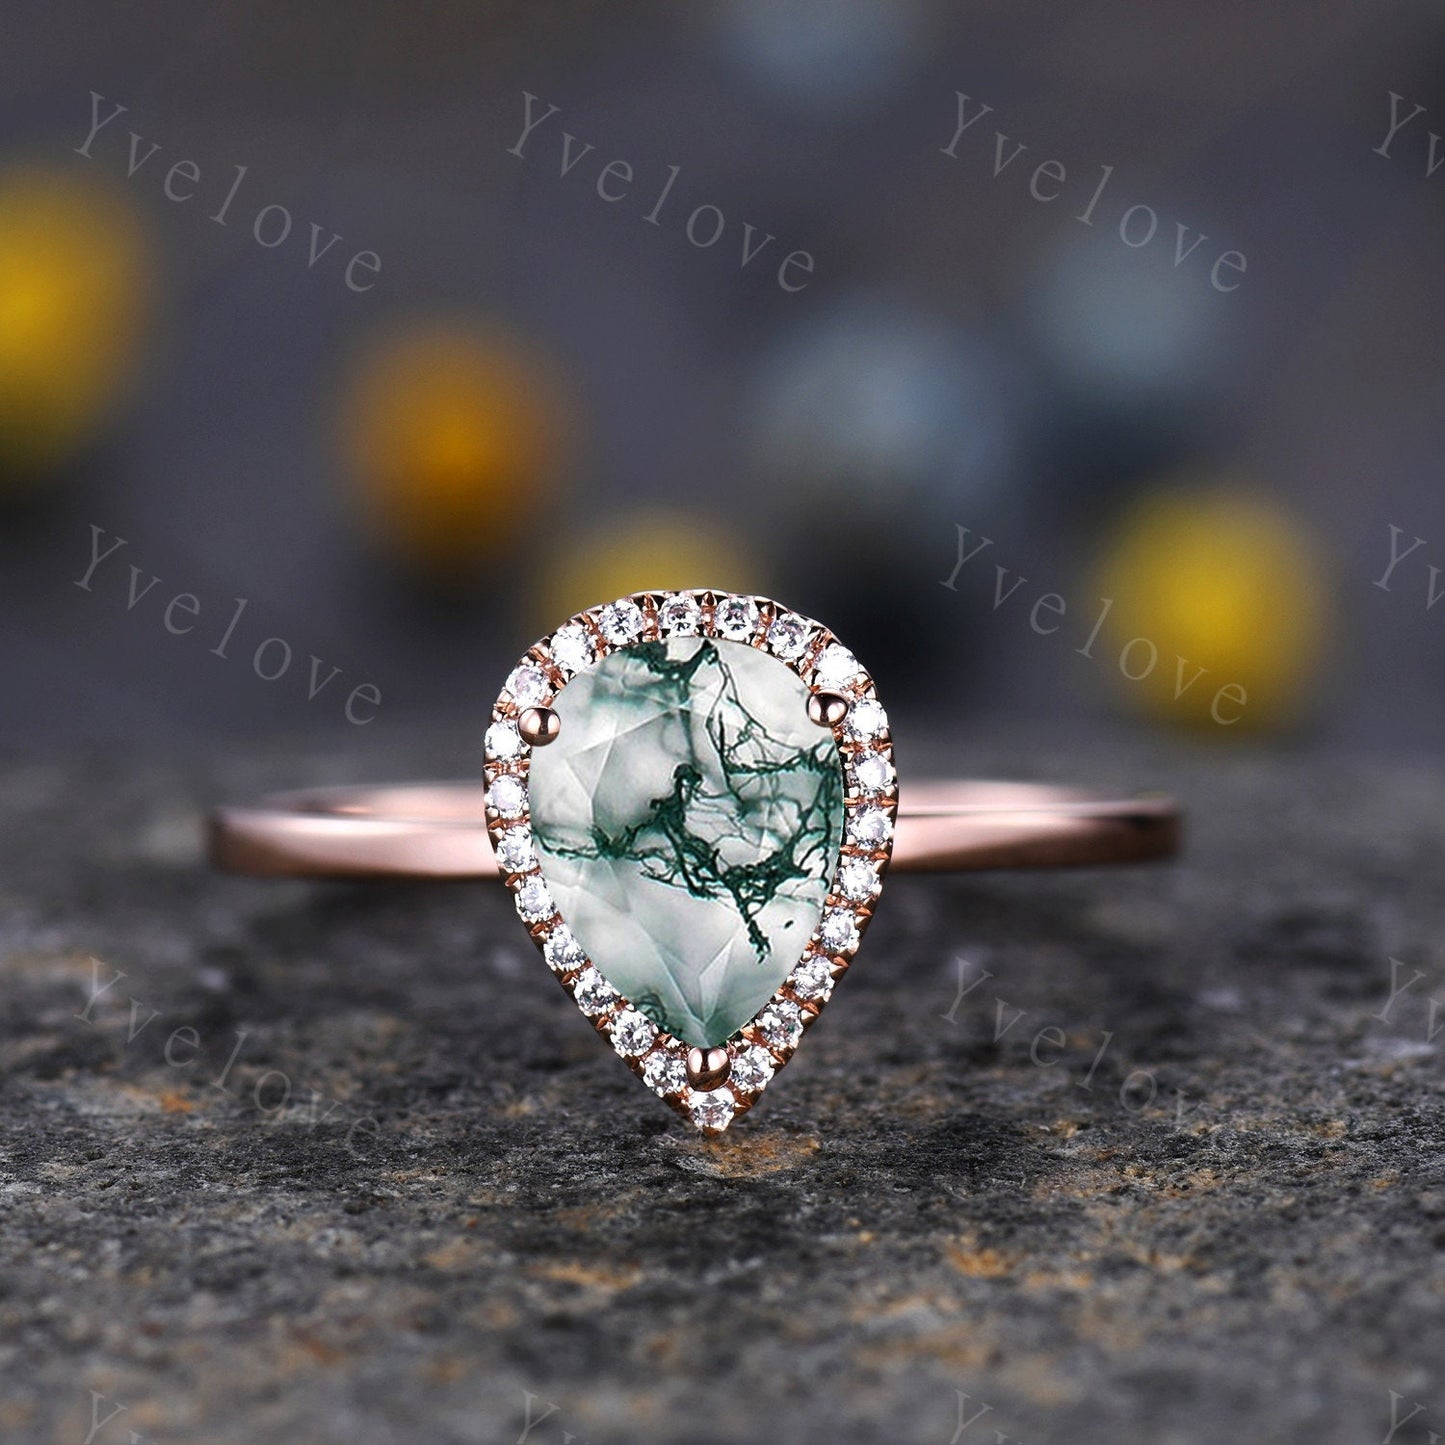 Unique Moss Agate Engagement Ring Set,Pear Cut Moss Agate Solitaire Ring,14k rose gold,Emerald Wedding band, Half Eternity matching band